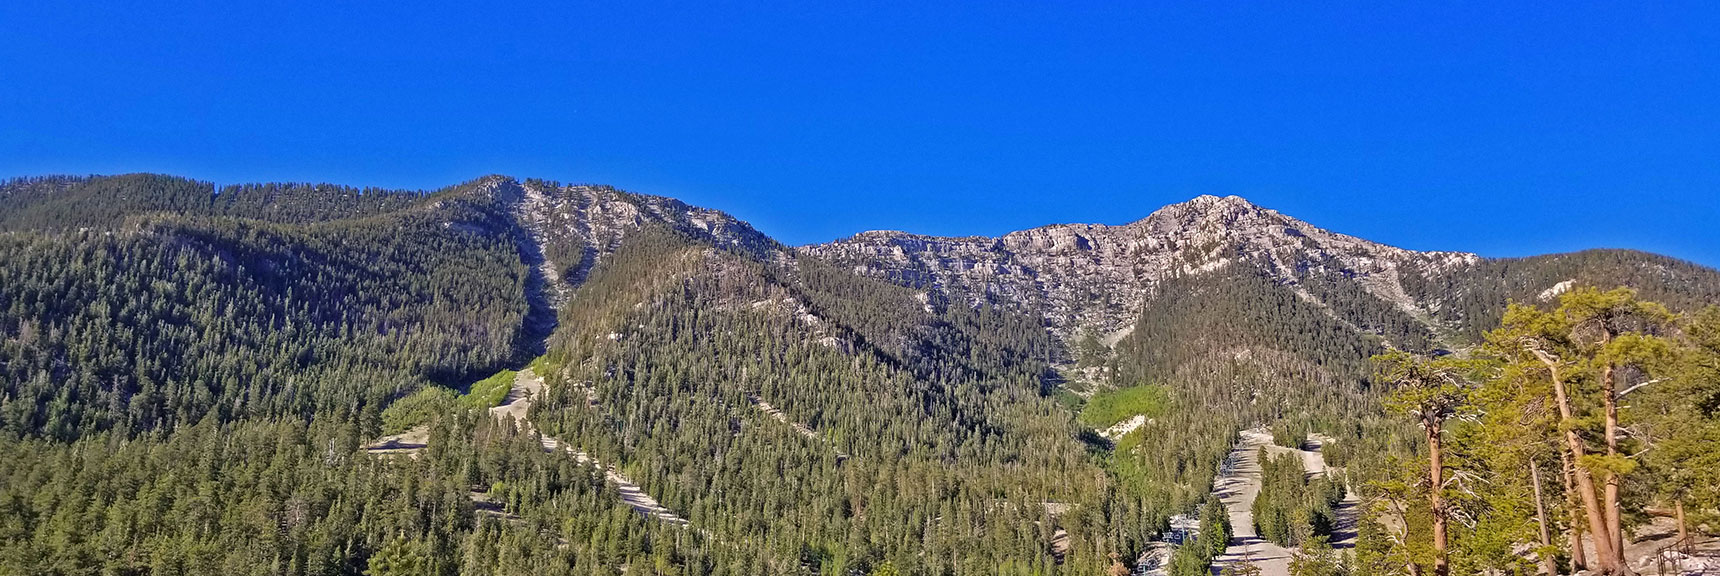 SE Ski Run to Plateau (left) to Lee Peak (right) | Lee Canyon to Kyle Canyon | Potential Routes | Mt Charleston Wilderness | Spring Mountains, Nevada